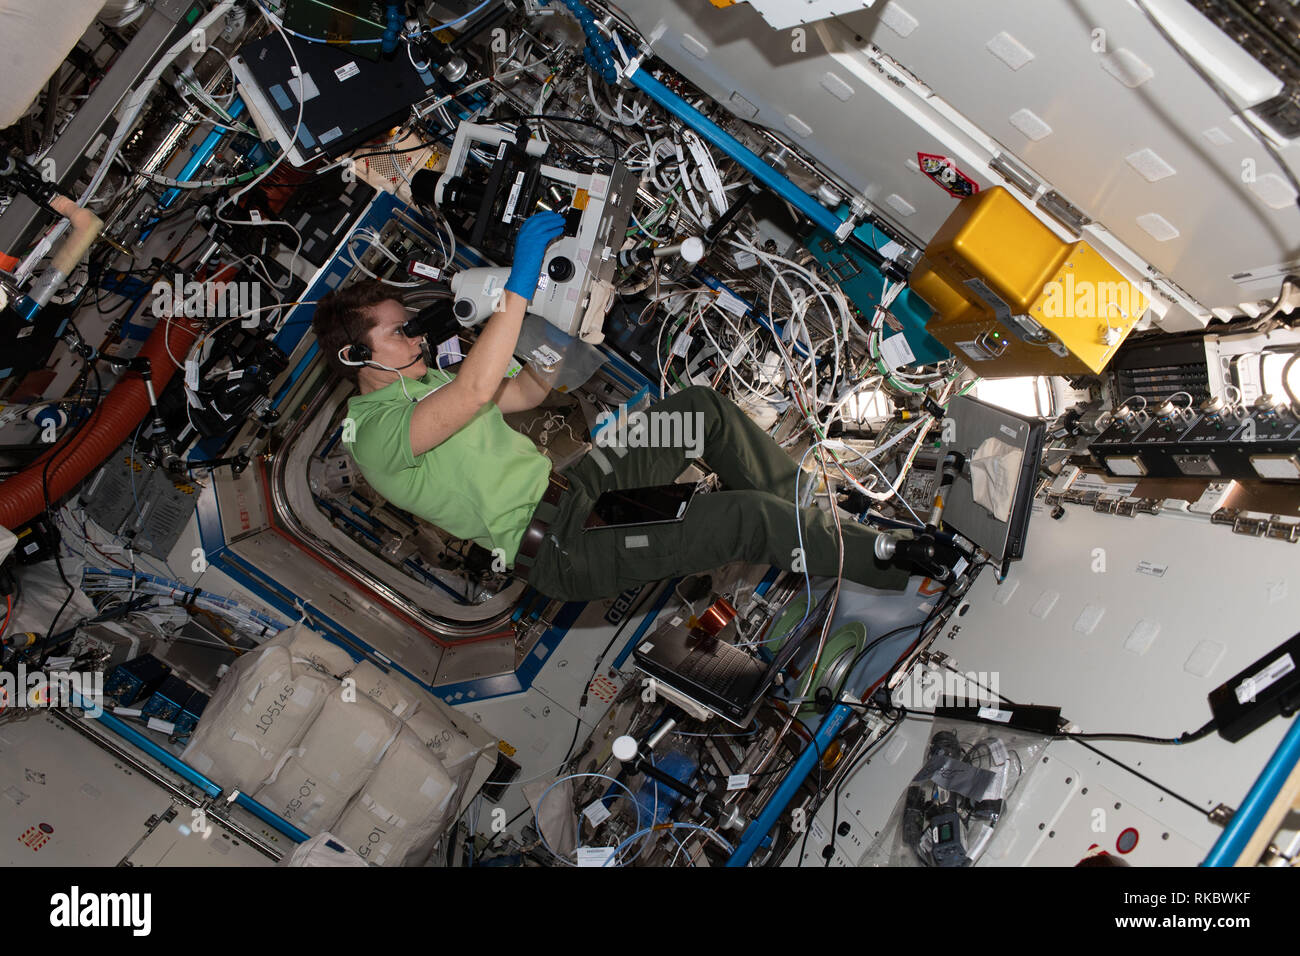 NASA astronaut Anne McClain peers into a microscope and takes photographs for the Protein Crystal Growth-16 experiment aboard the International Space Station January 3, 2019 in Earth Orbit. The Protein Crystal Growth-16 experiment is exploring therapies for treating Parkinson's disease. Stock Photo